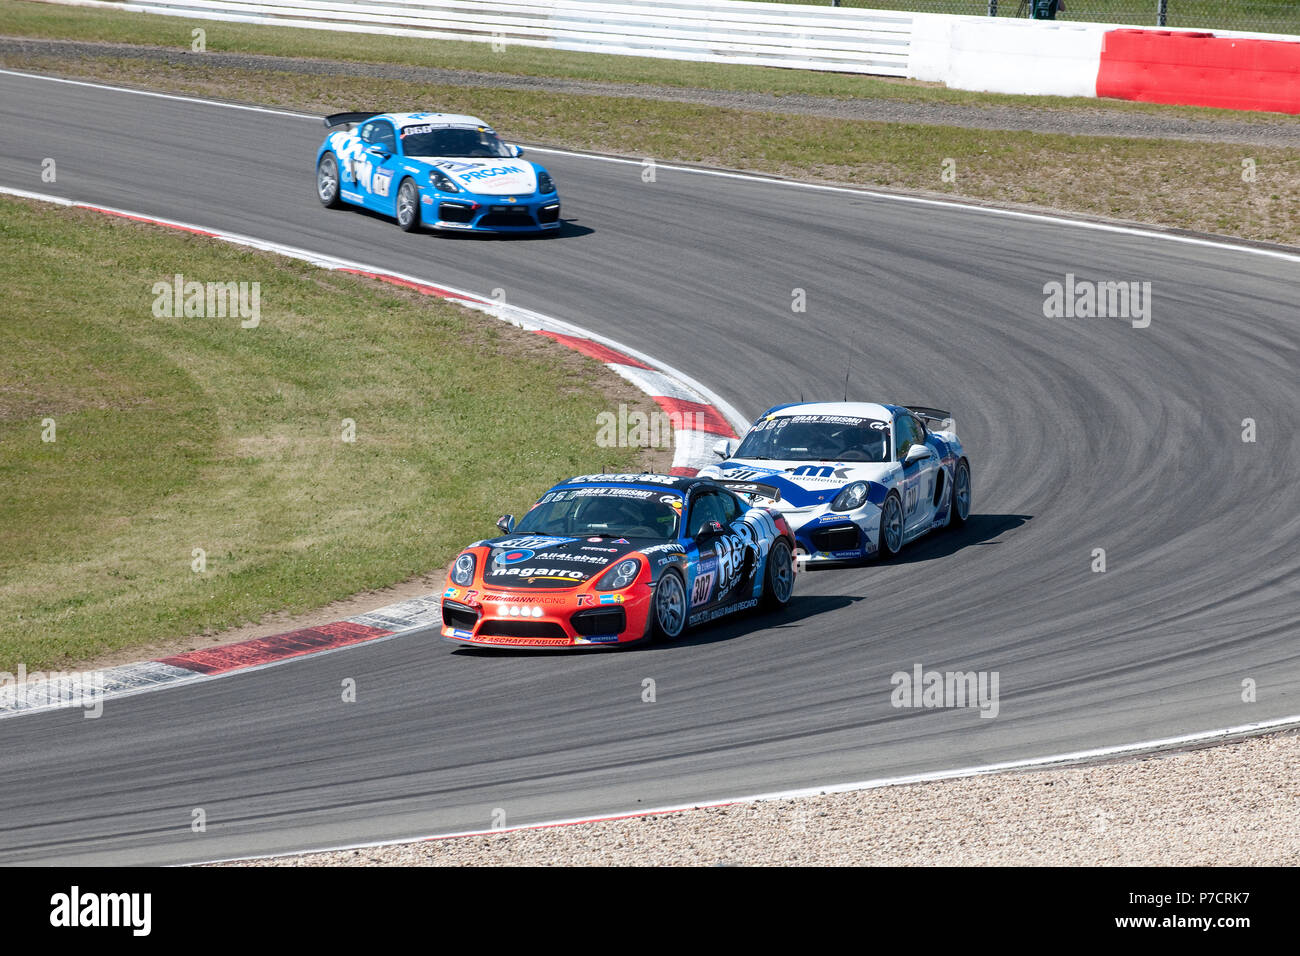 Porsche Cayman GT4 Clubsport, Nuerburgring, 24h Nuerburgring, motorsports, curve curbes, corse, Eifel, Renania-Palatinato, Germania, Europa Foto Stock